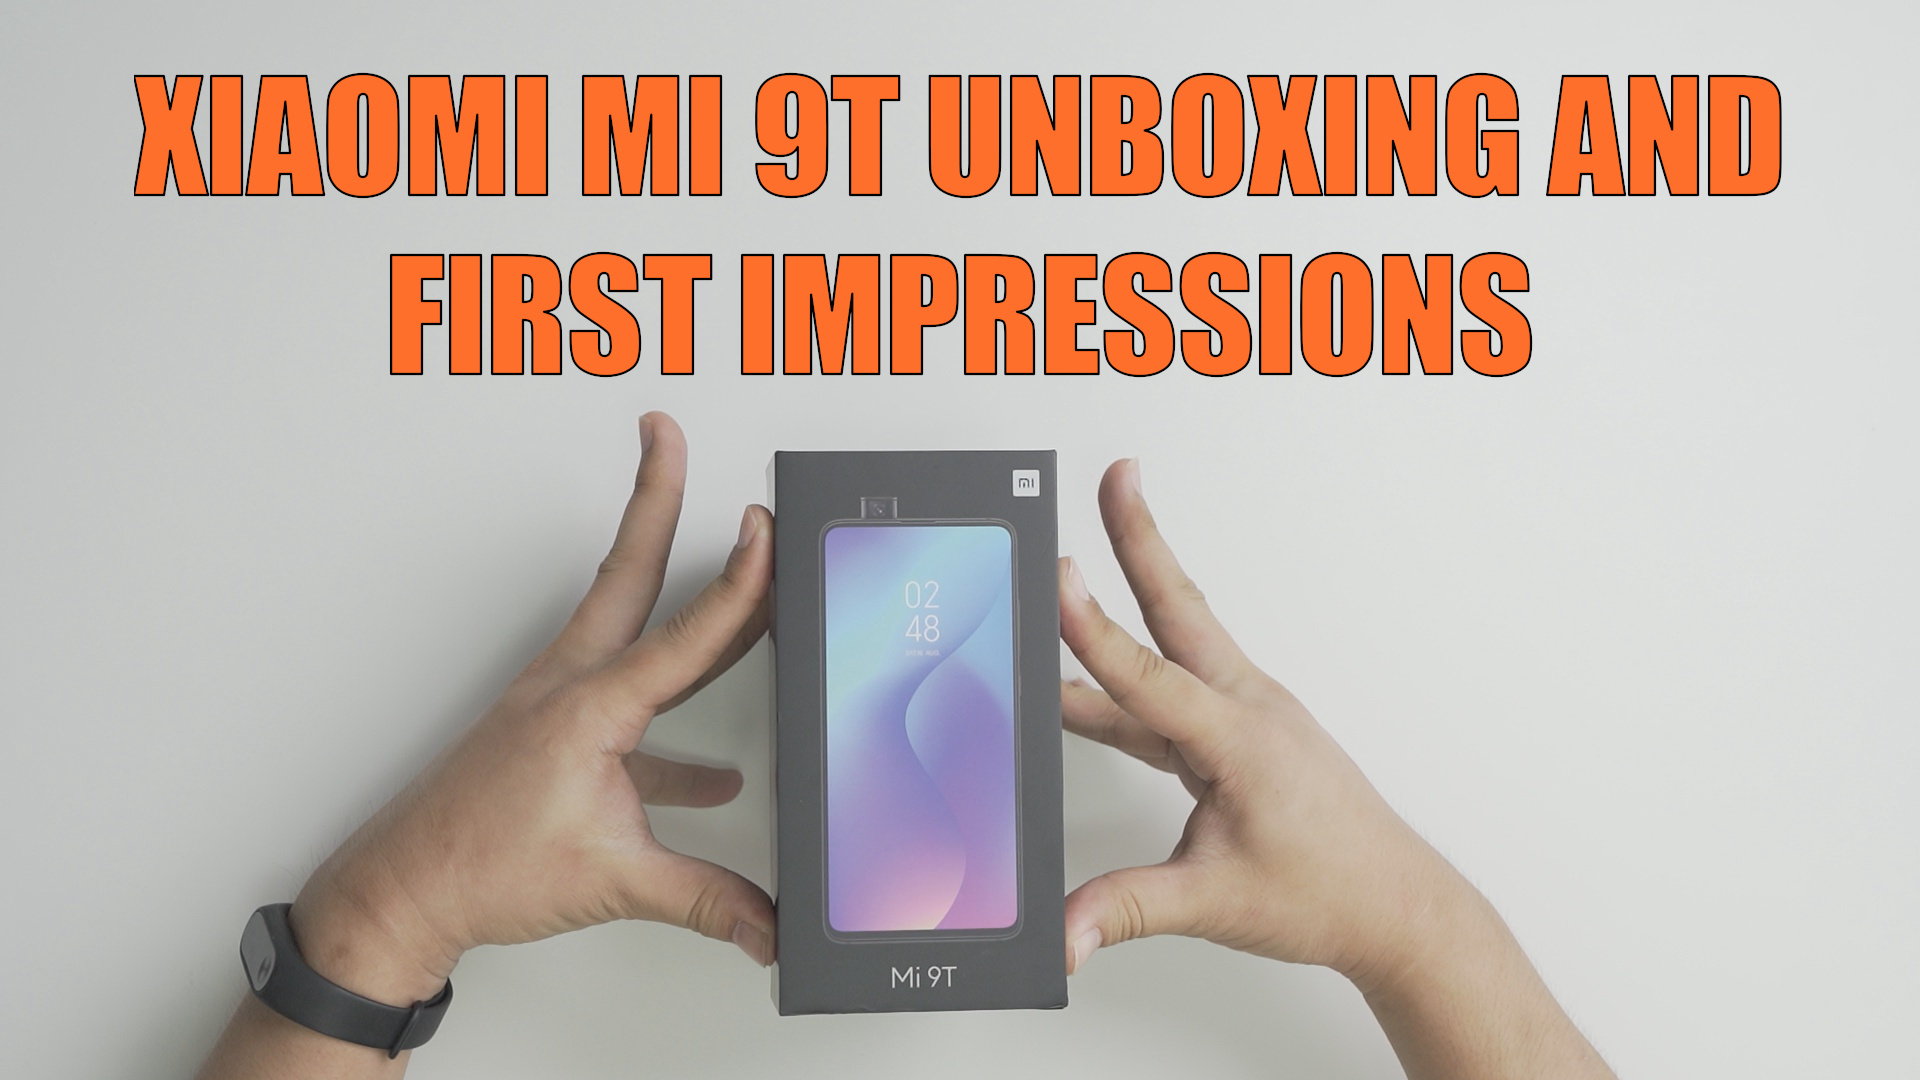 Check out our unboxing and first impressions of the Xiaomi Mi 9T